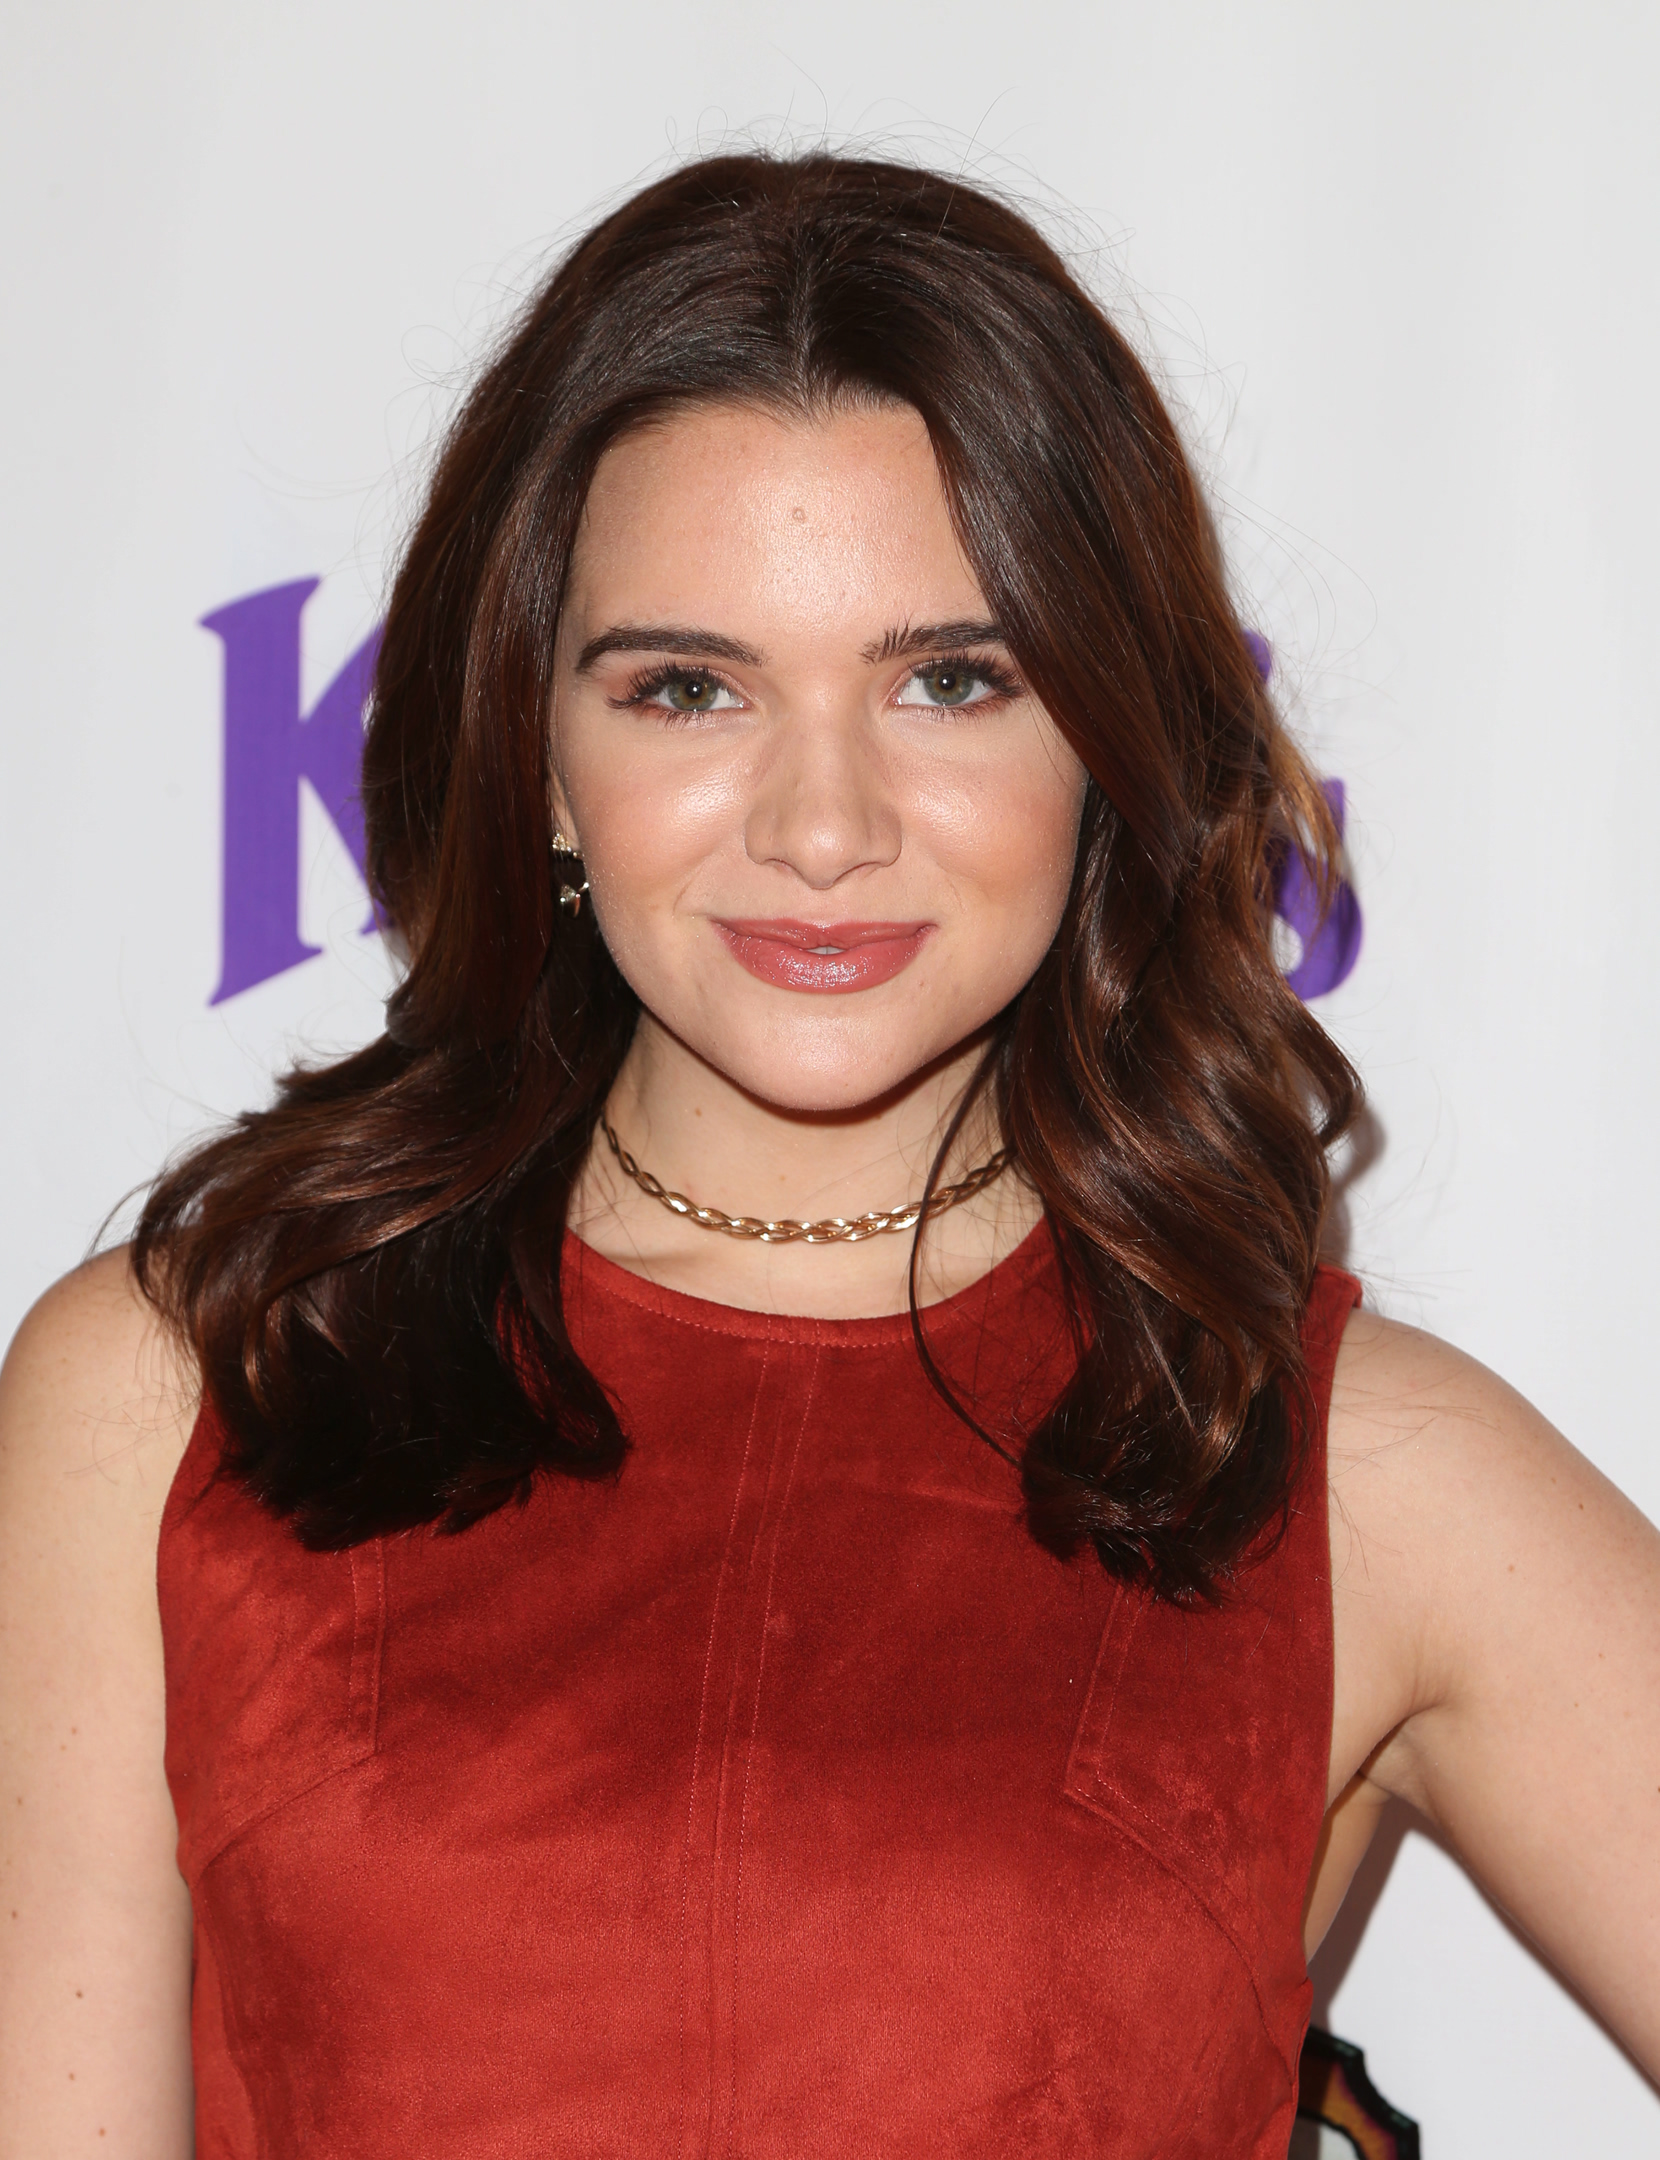 katie-stevens-ghostrider-reopening-at-knotts-berry-farm-on-642016-in-buena-park-california-11.jpg